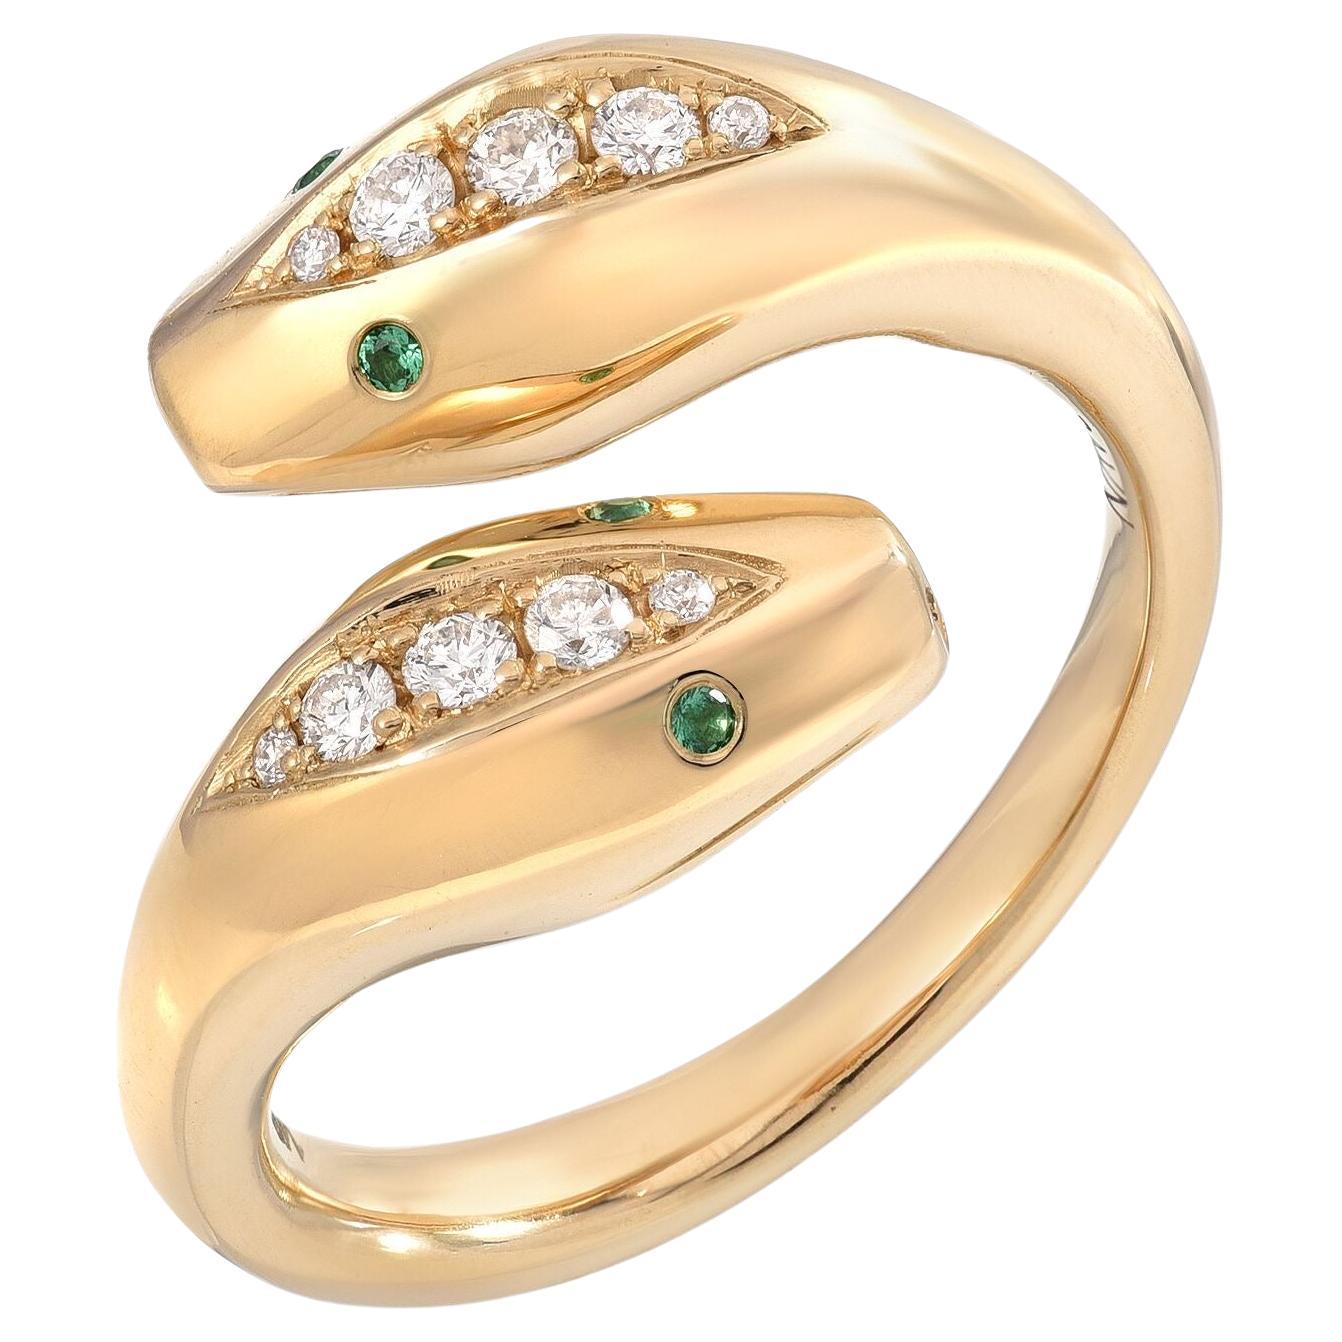 Round Cut House of RAVN, 14k Gold 2 Headed Serpent Wrap Ring w/ Emerald & Diamond details For Sale